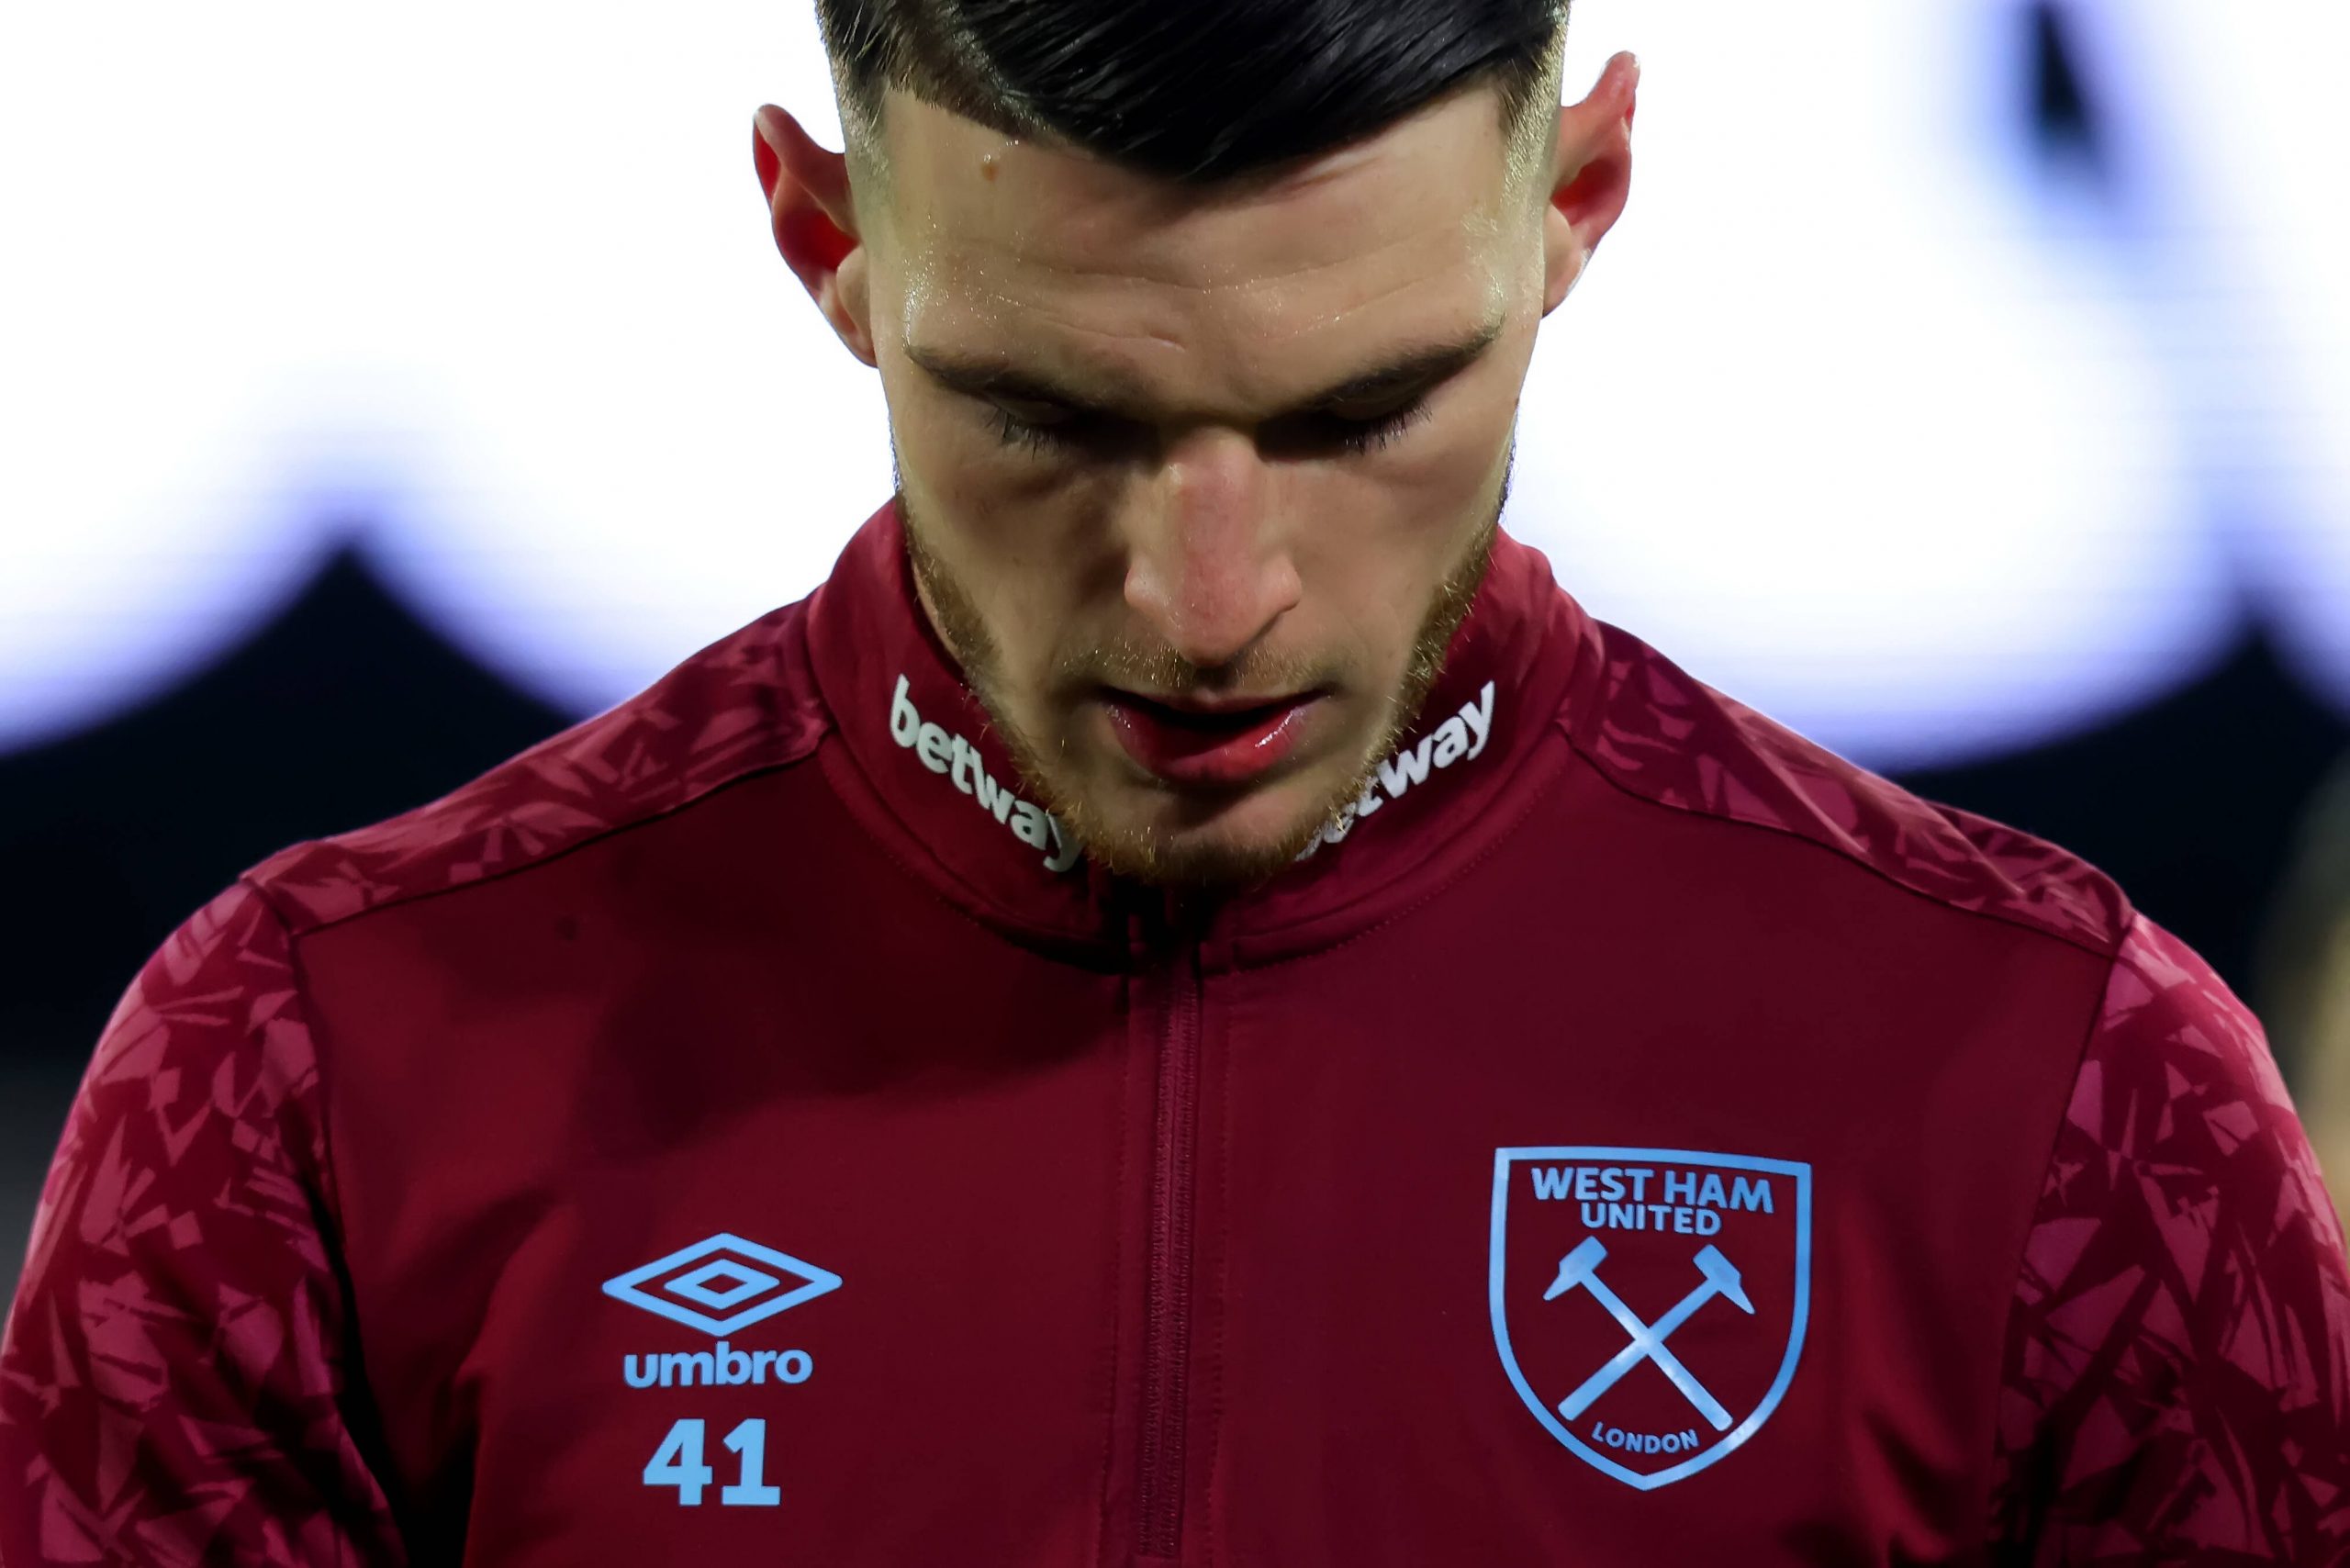 West Ham United to reject bids for Declan Rice amidst interest from Chelsea